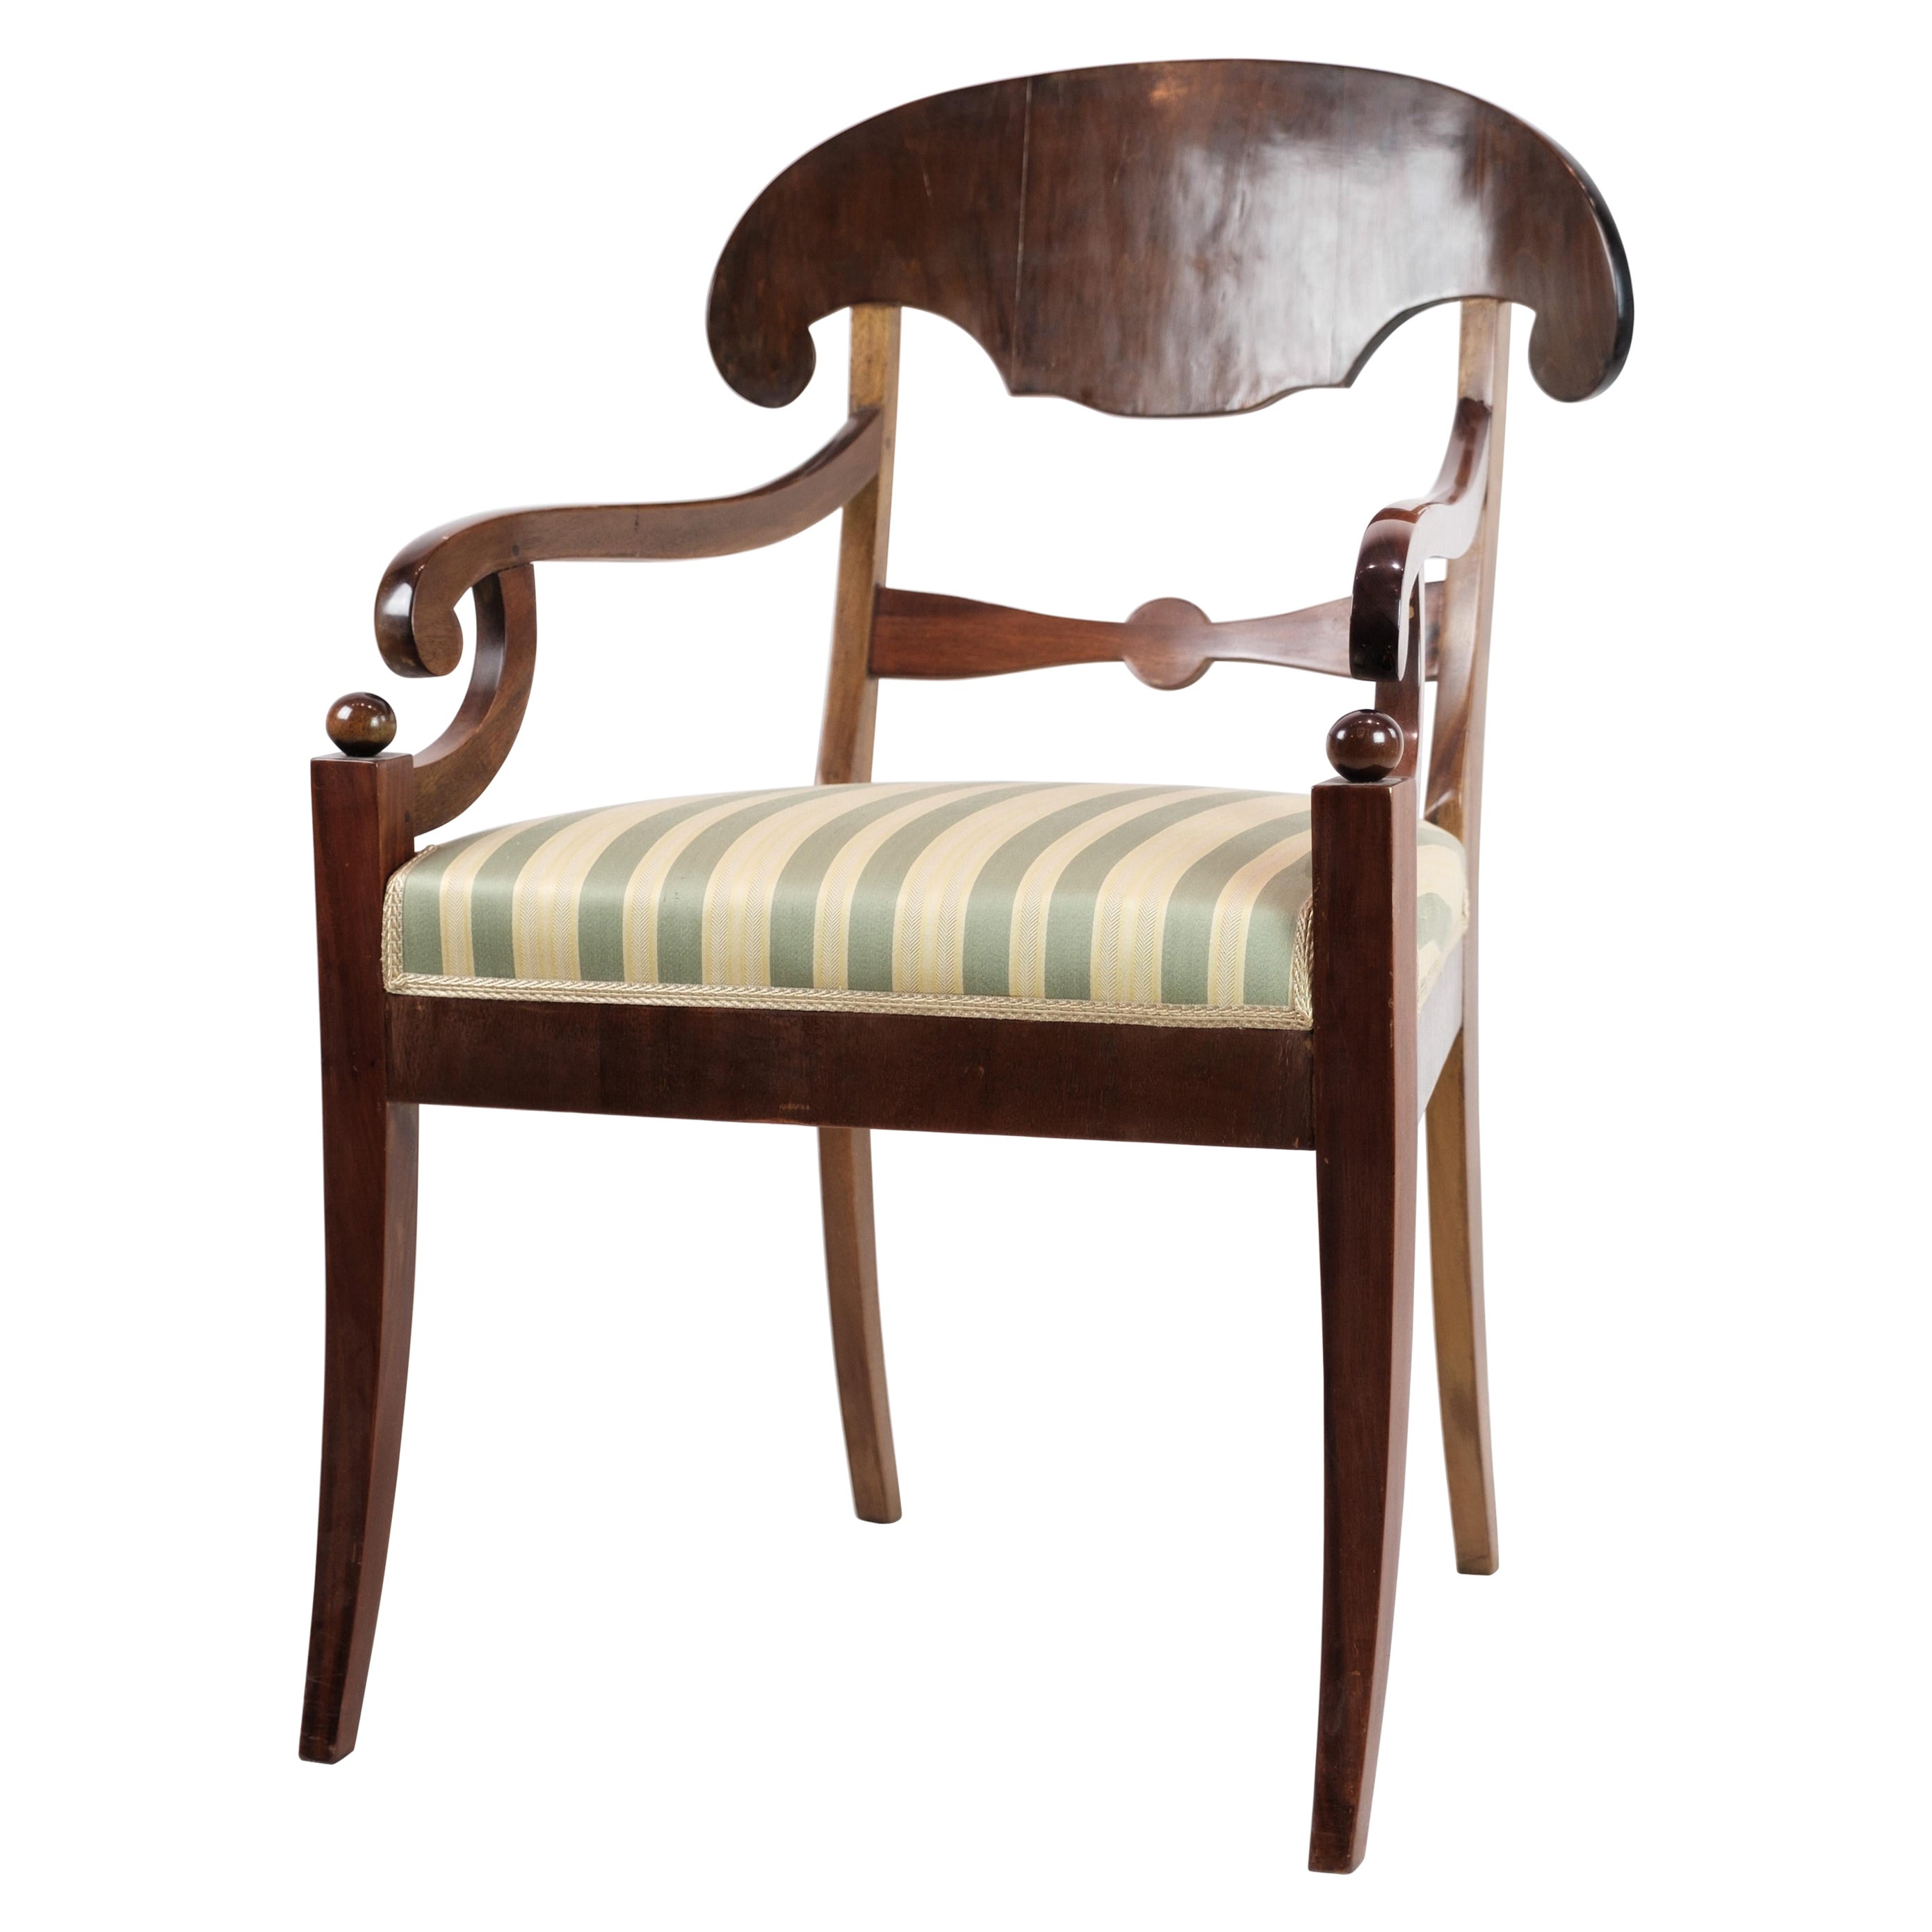 Late Empire Armchair Made In Mahogany With Light Striped Fabric From 1840s For Sale